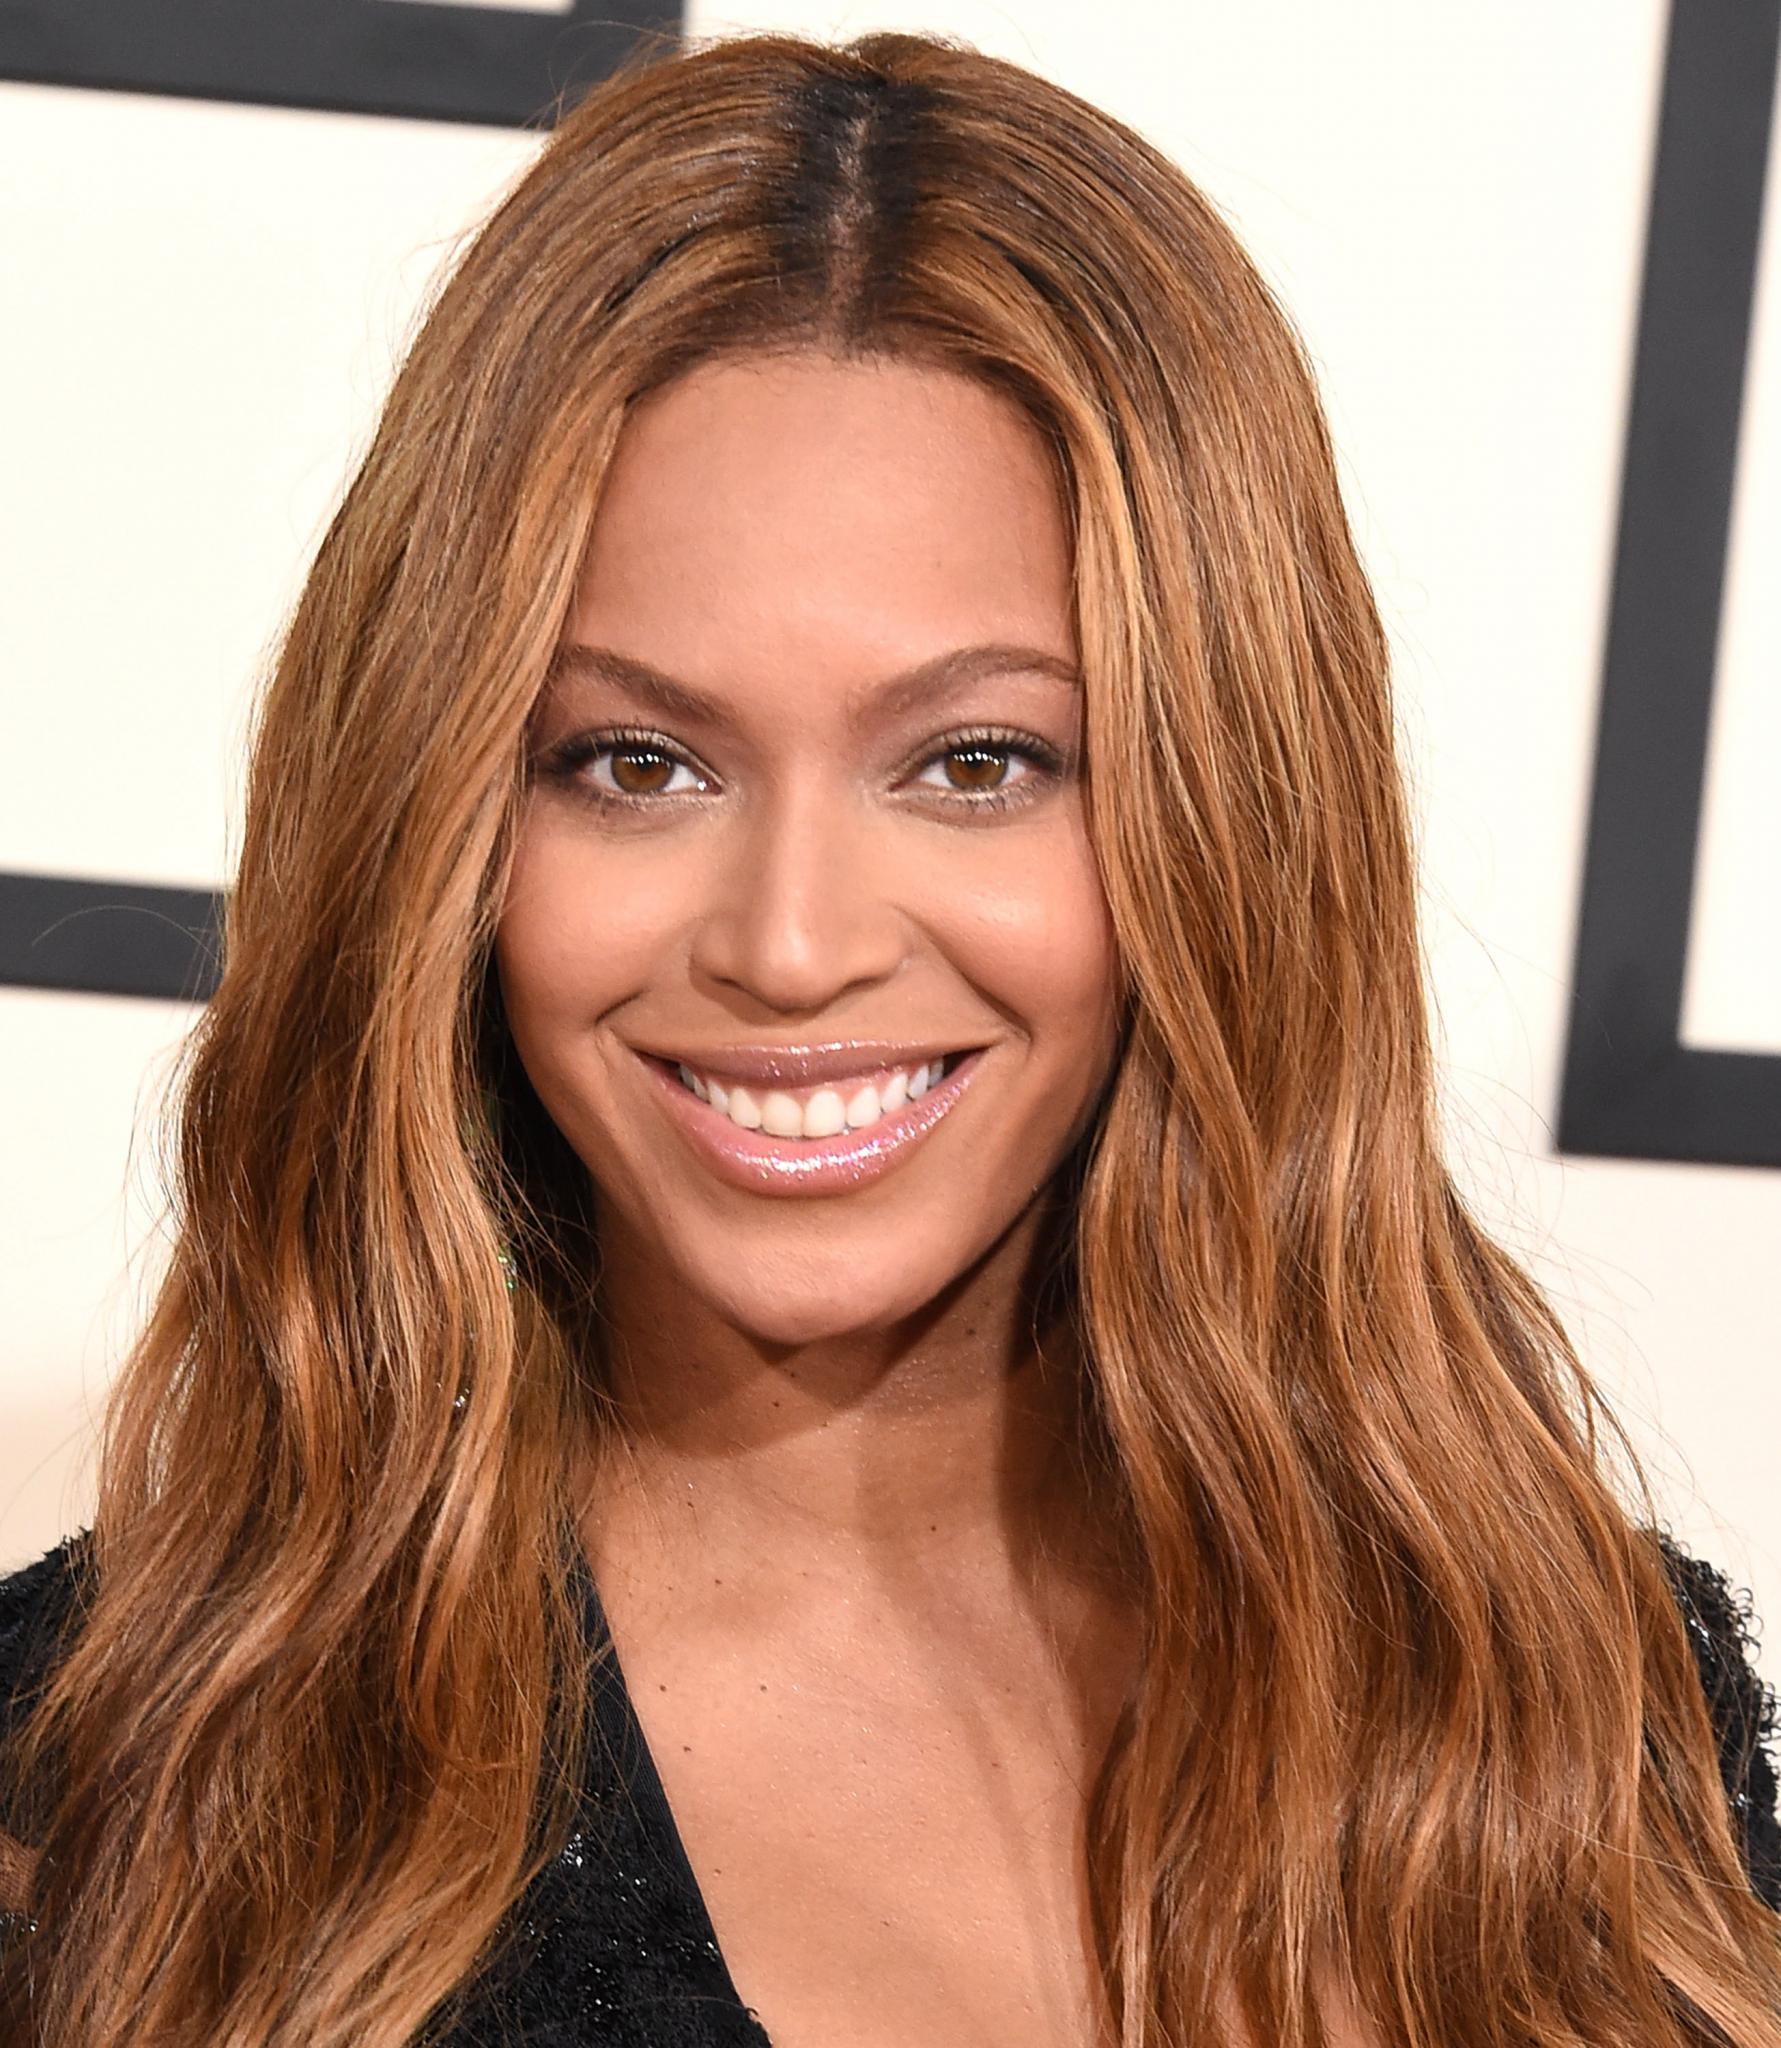 What Your Celeb Beauty Crush Says About You